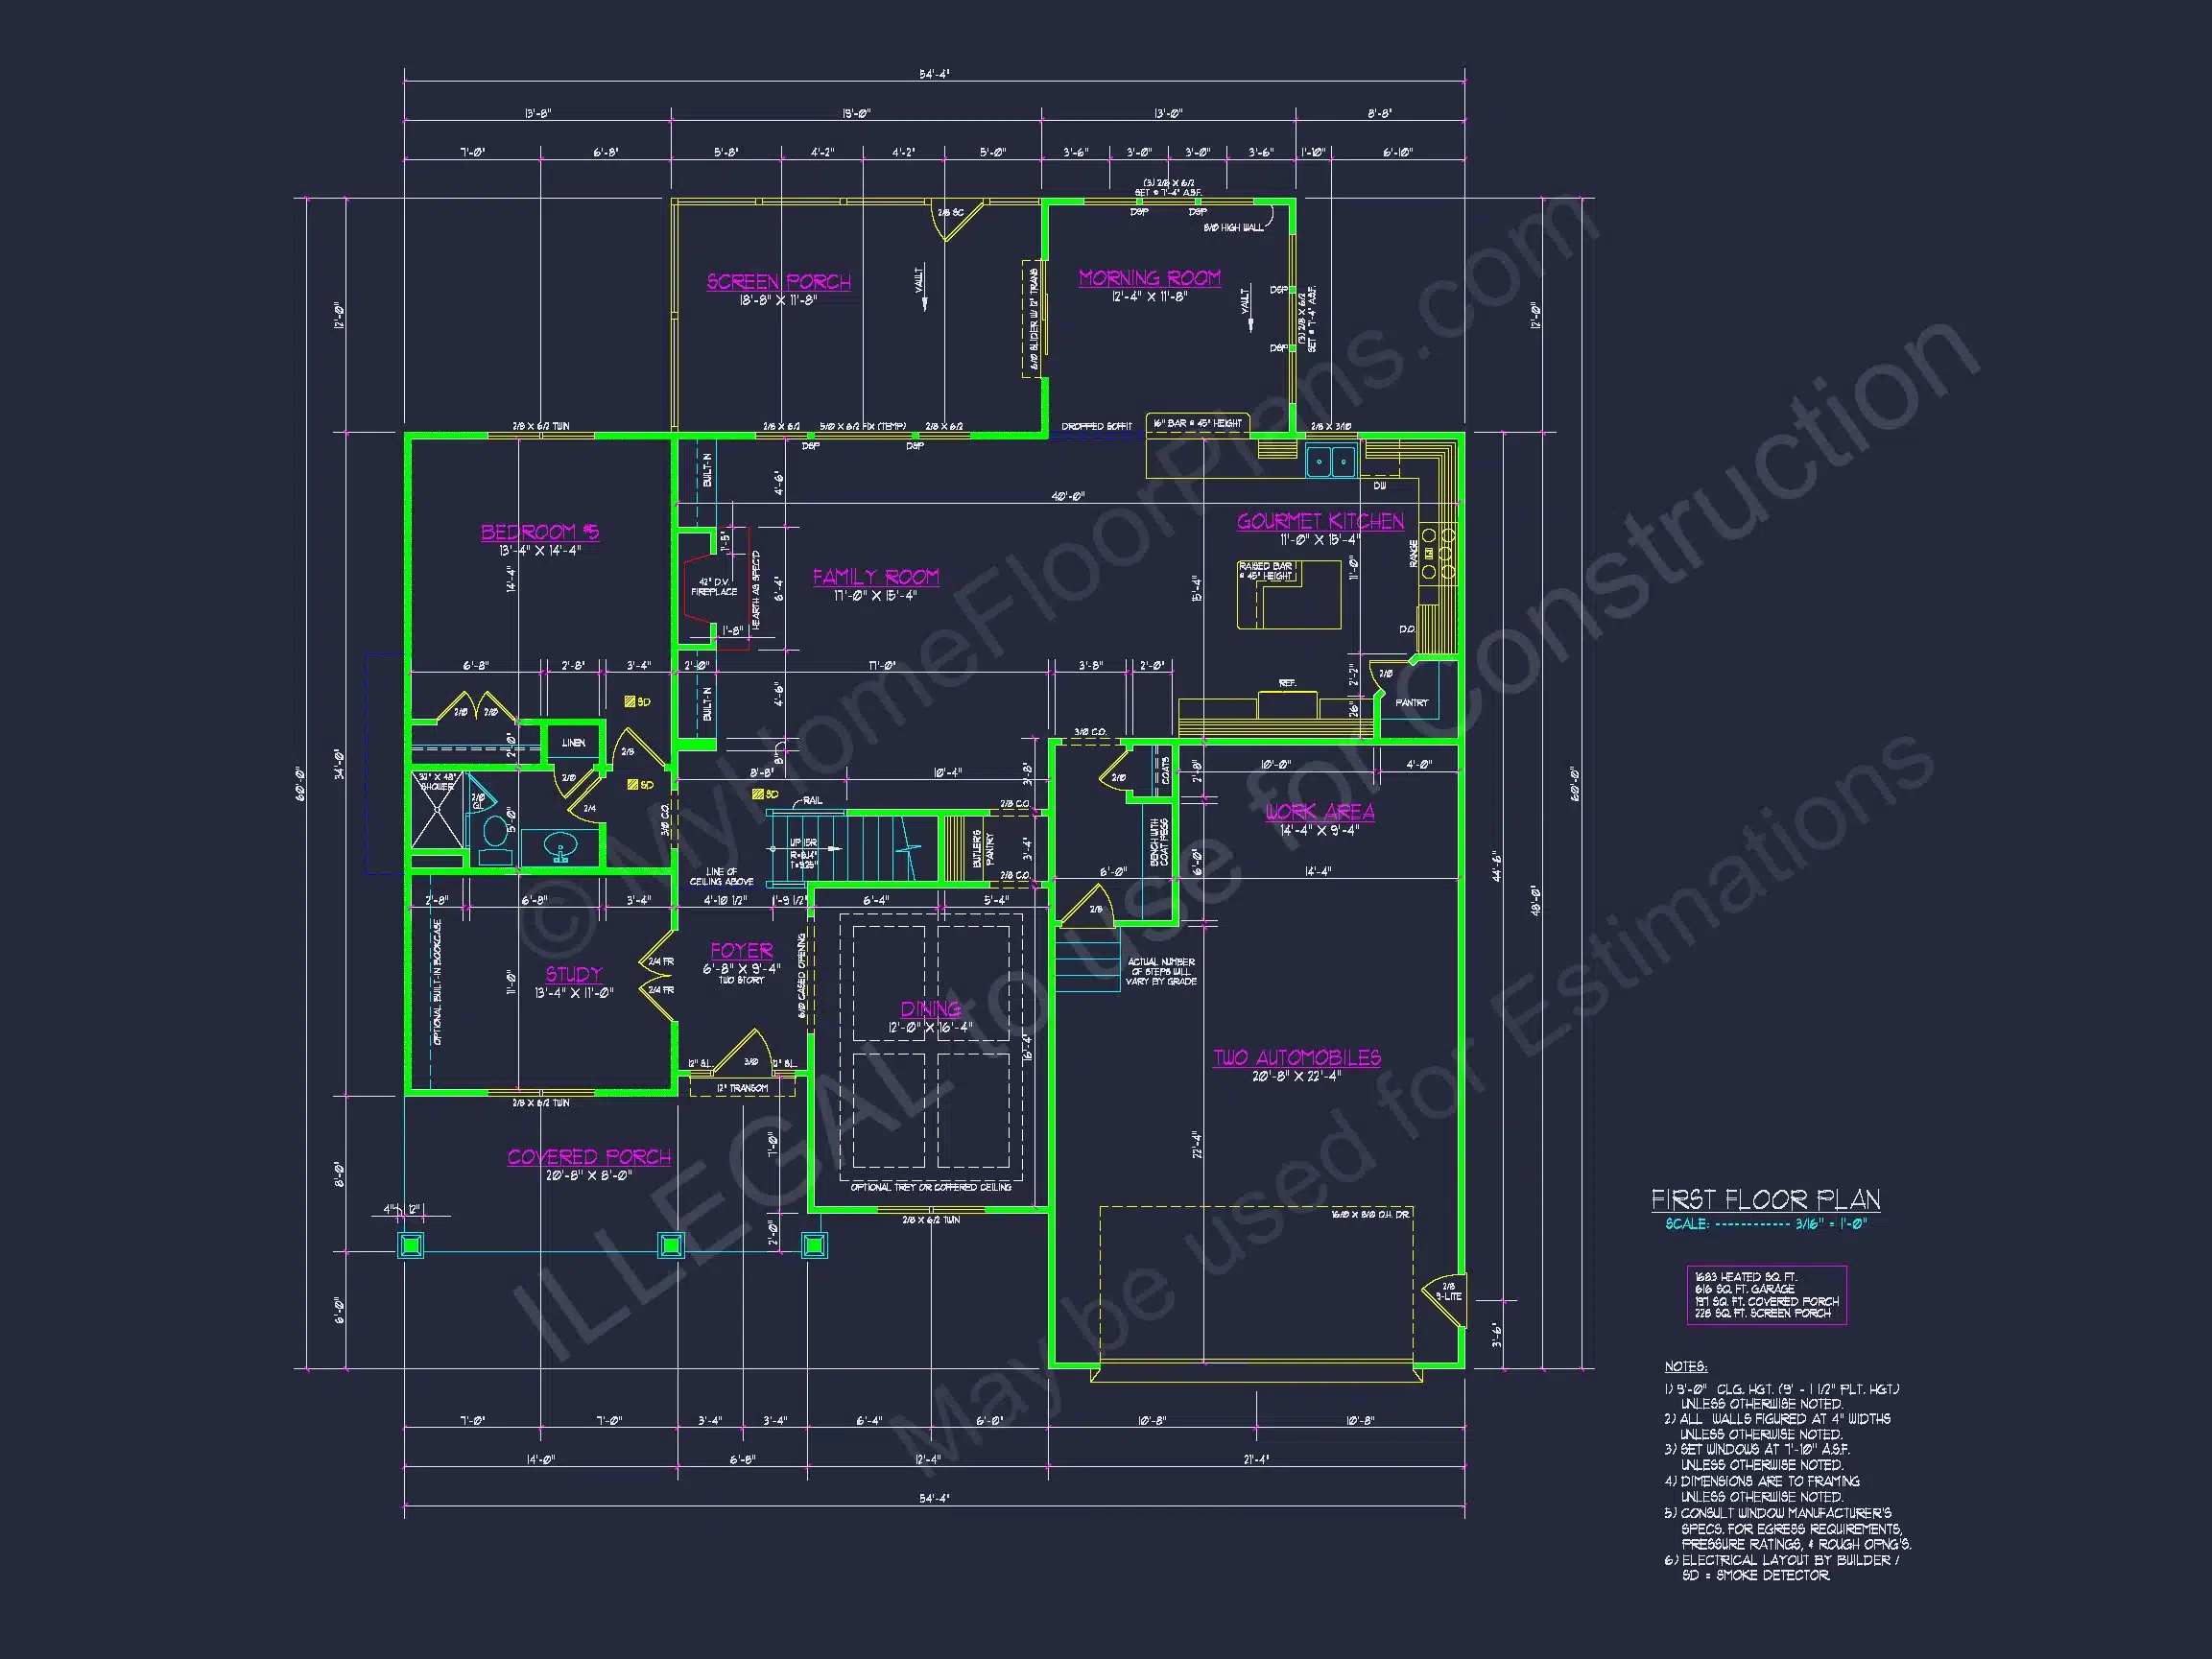 12-2003 my home floor plans_Page_09